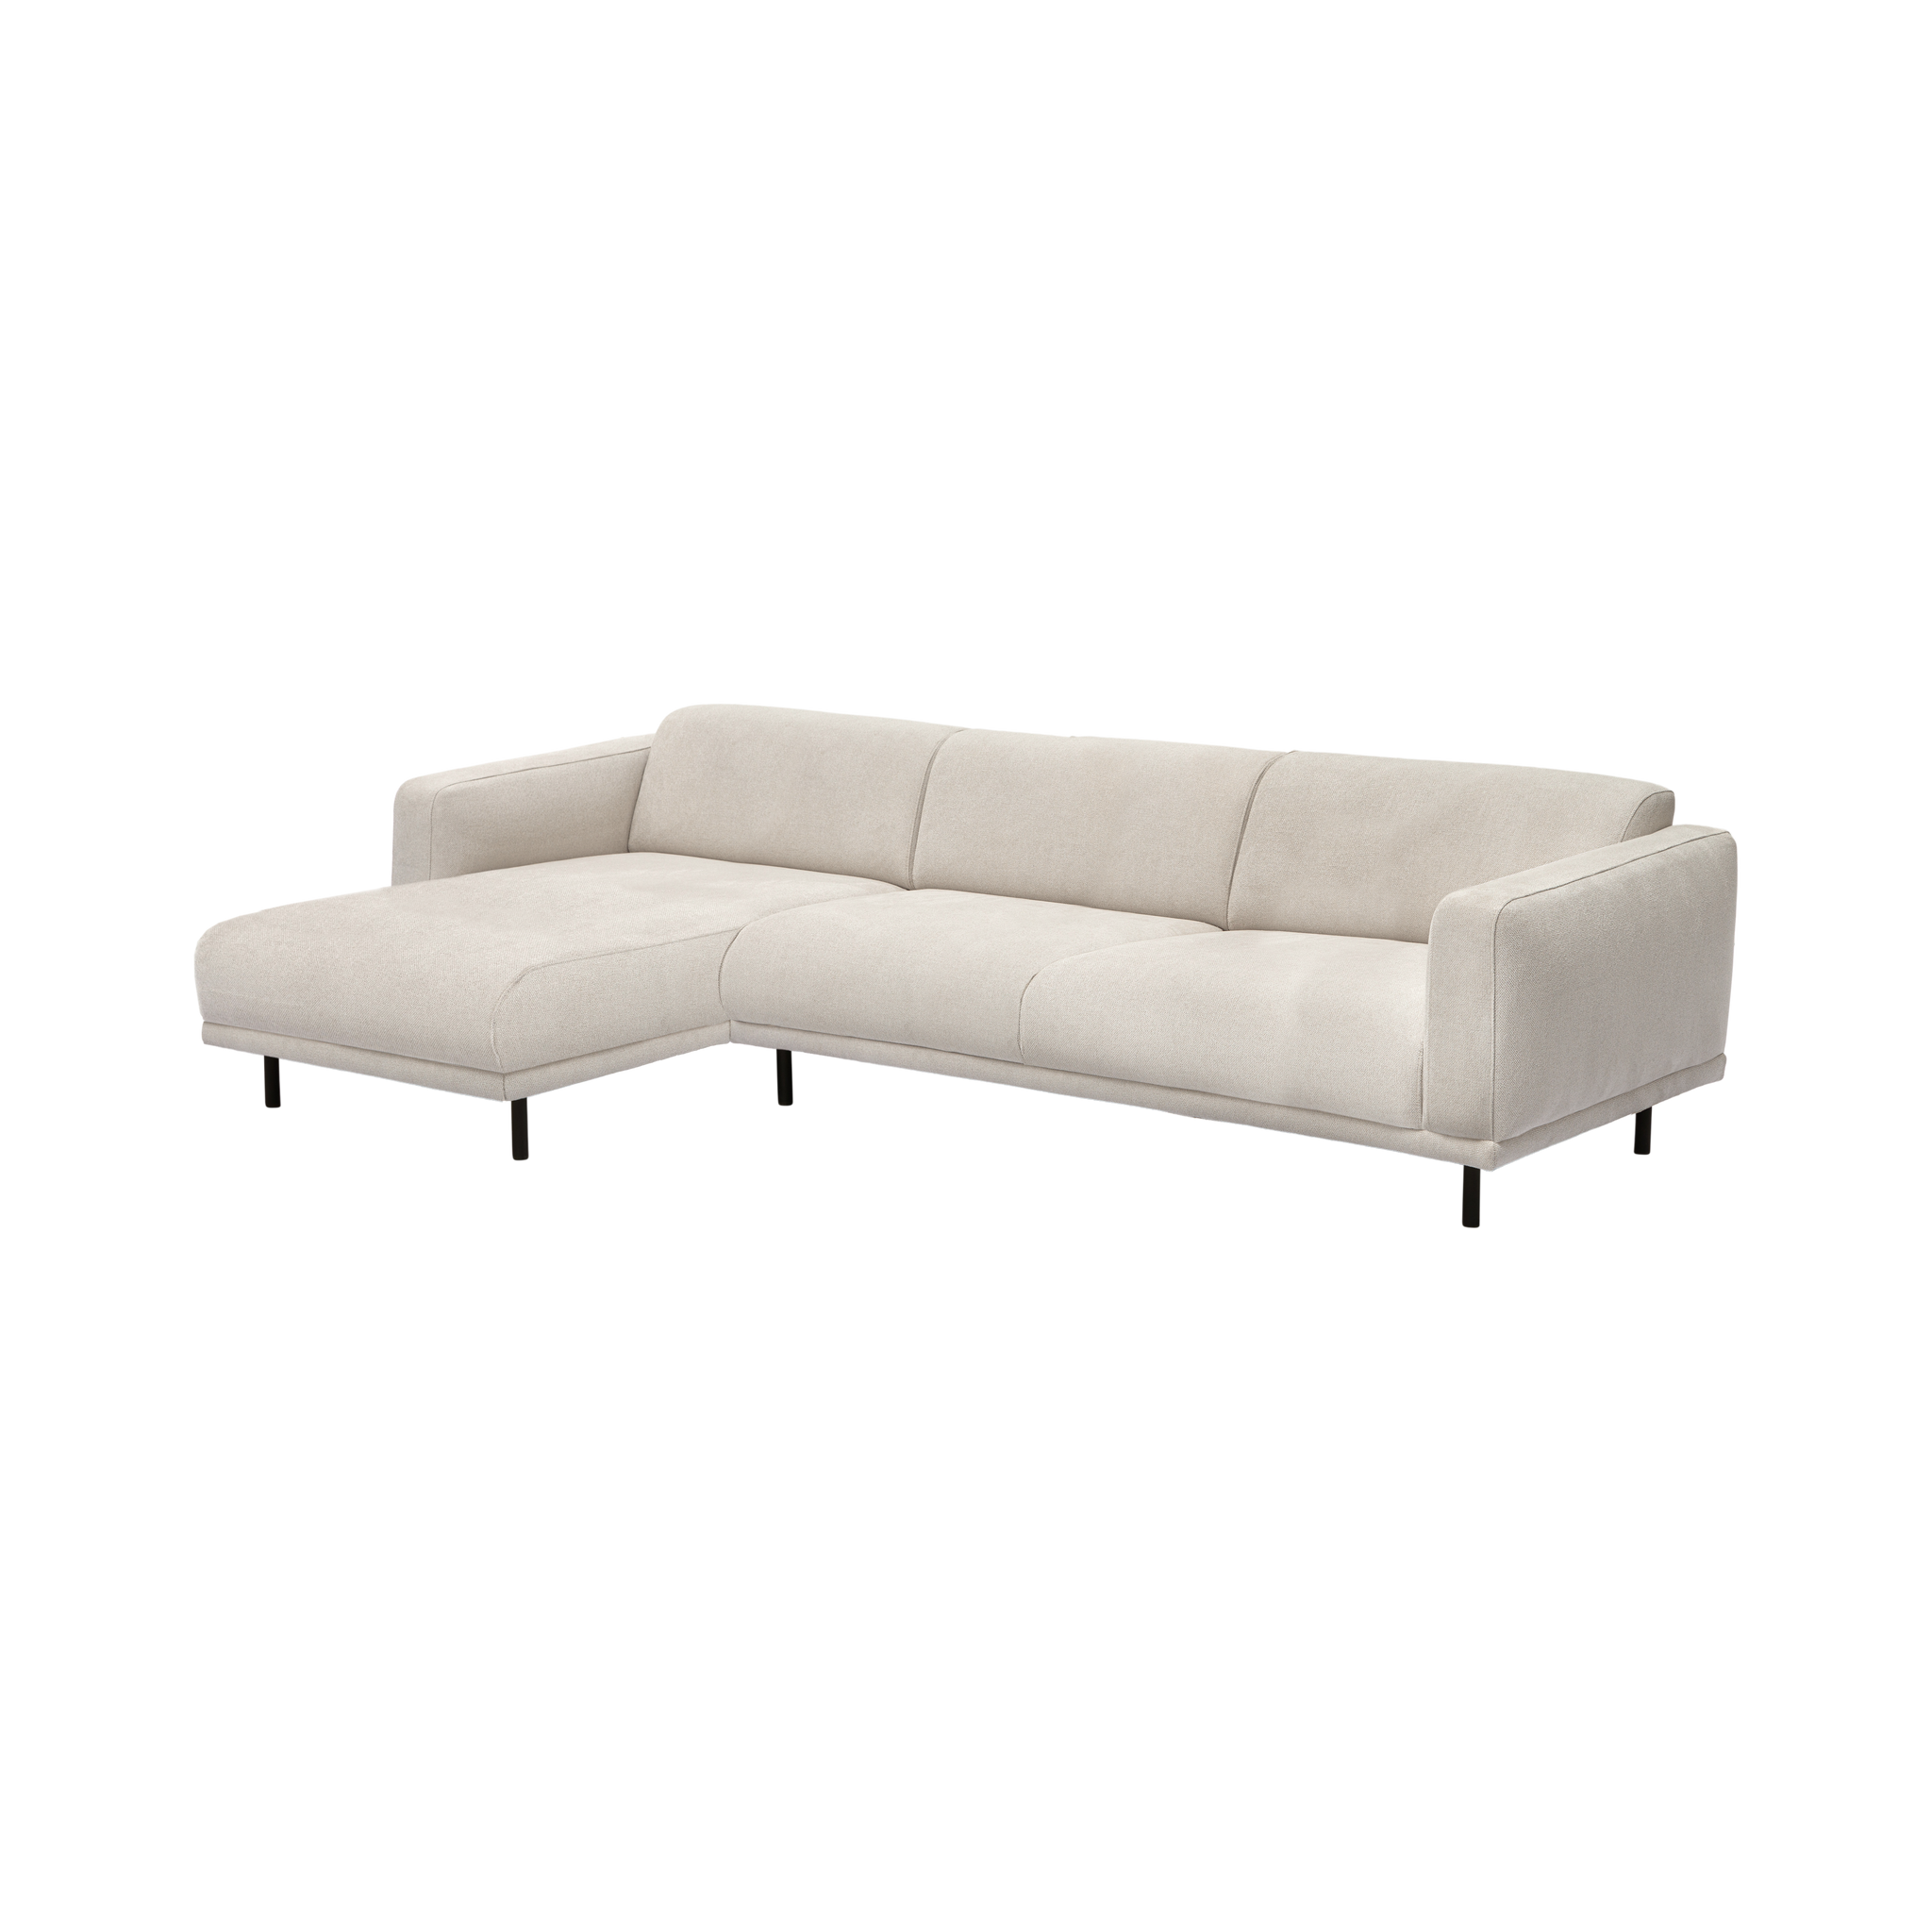 86928 BRIXEN Sofa with chaise-longue on the left